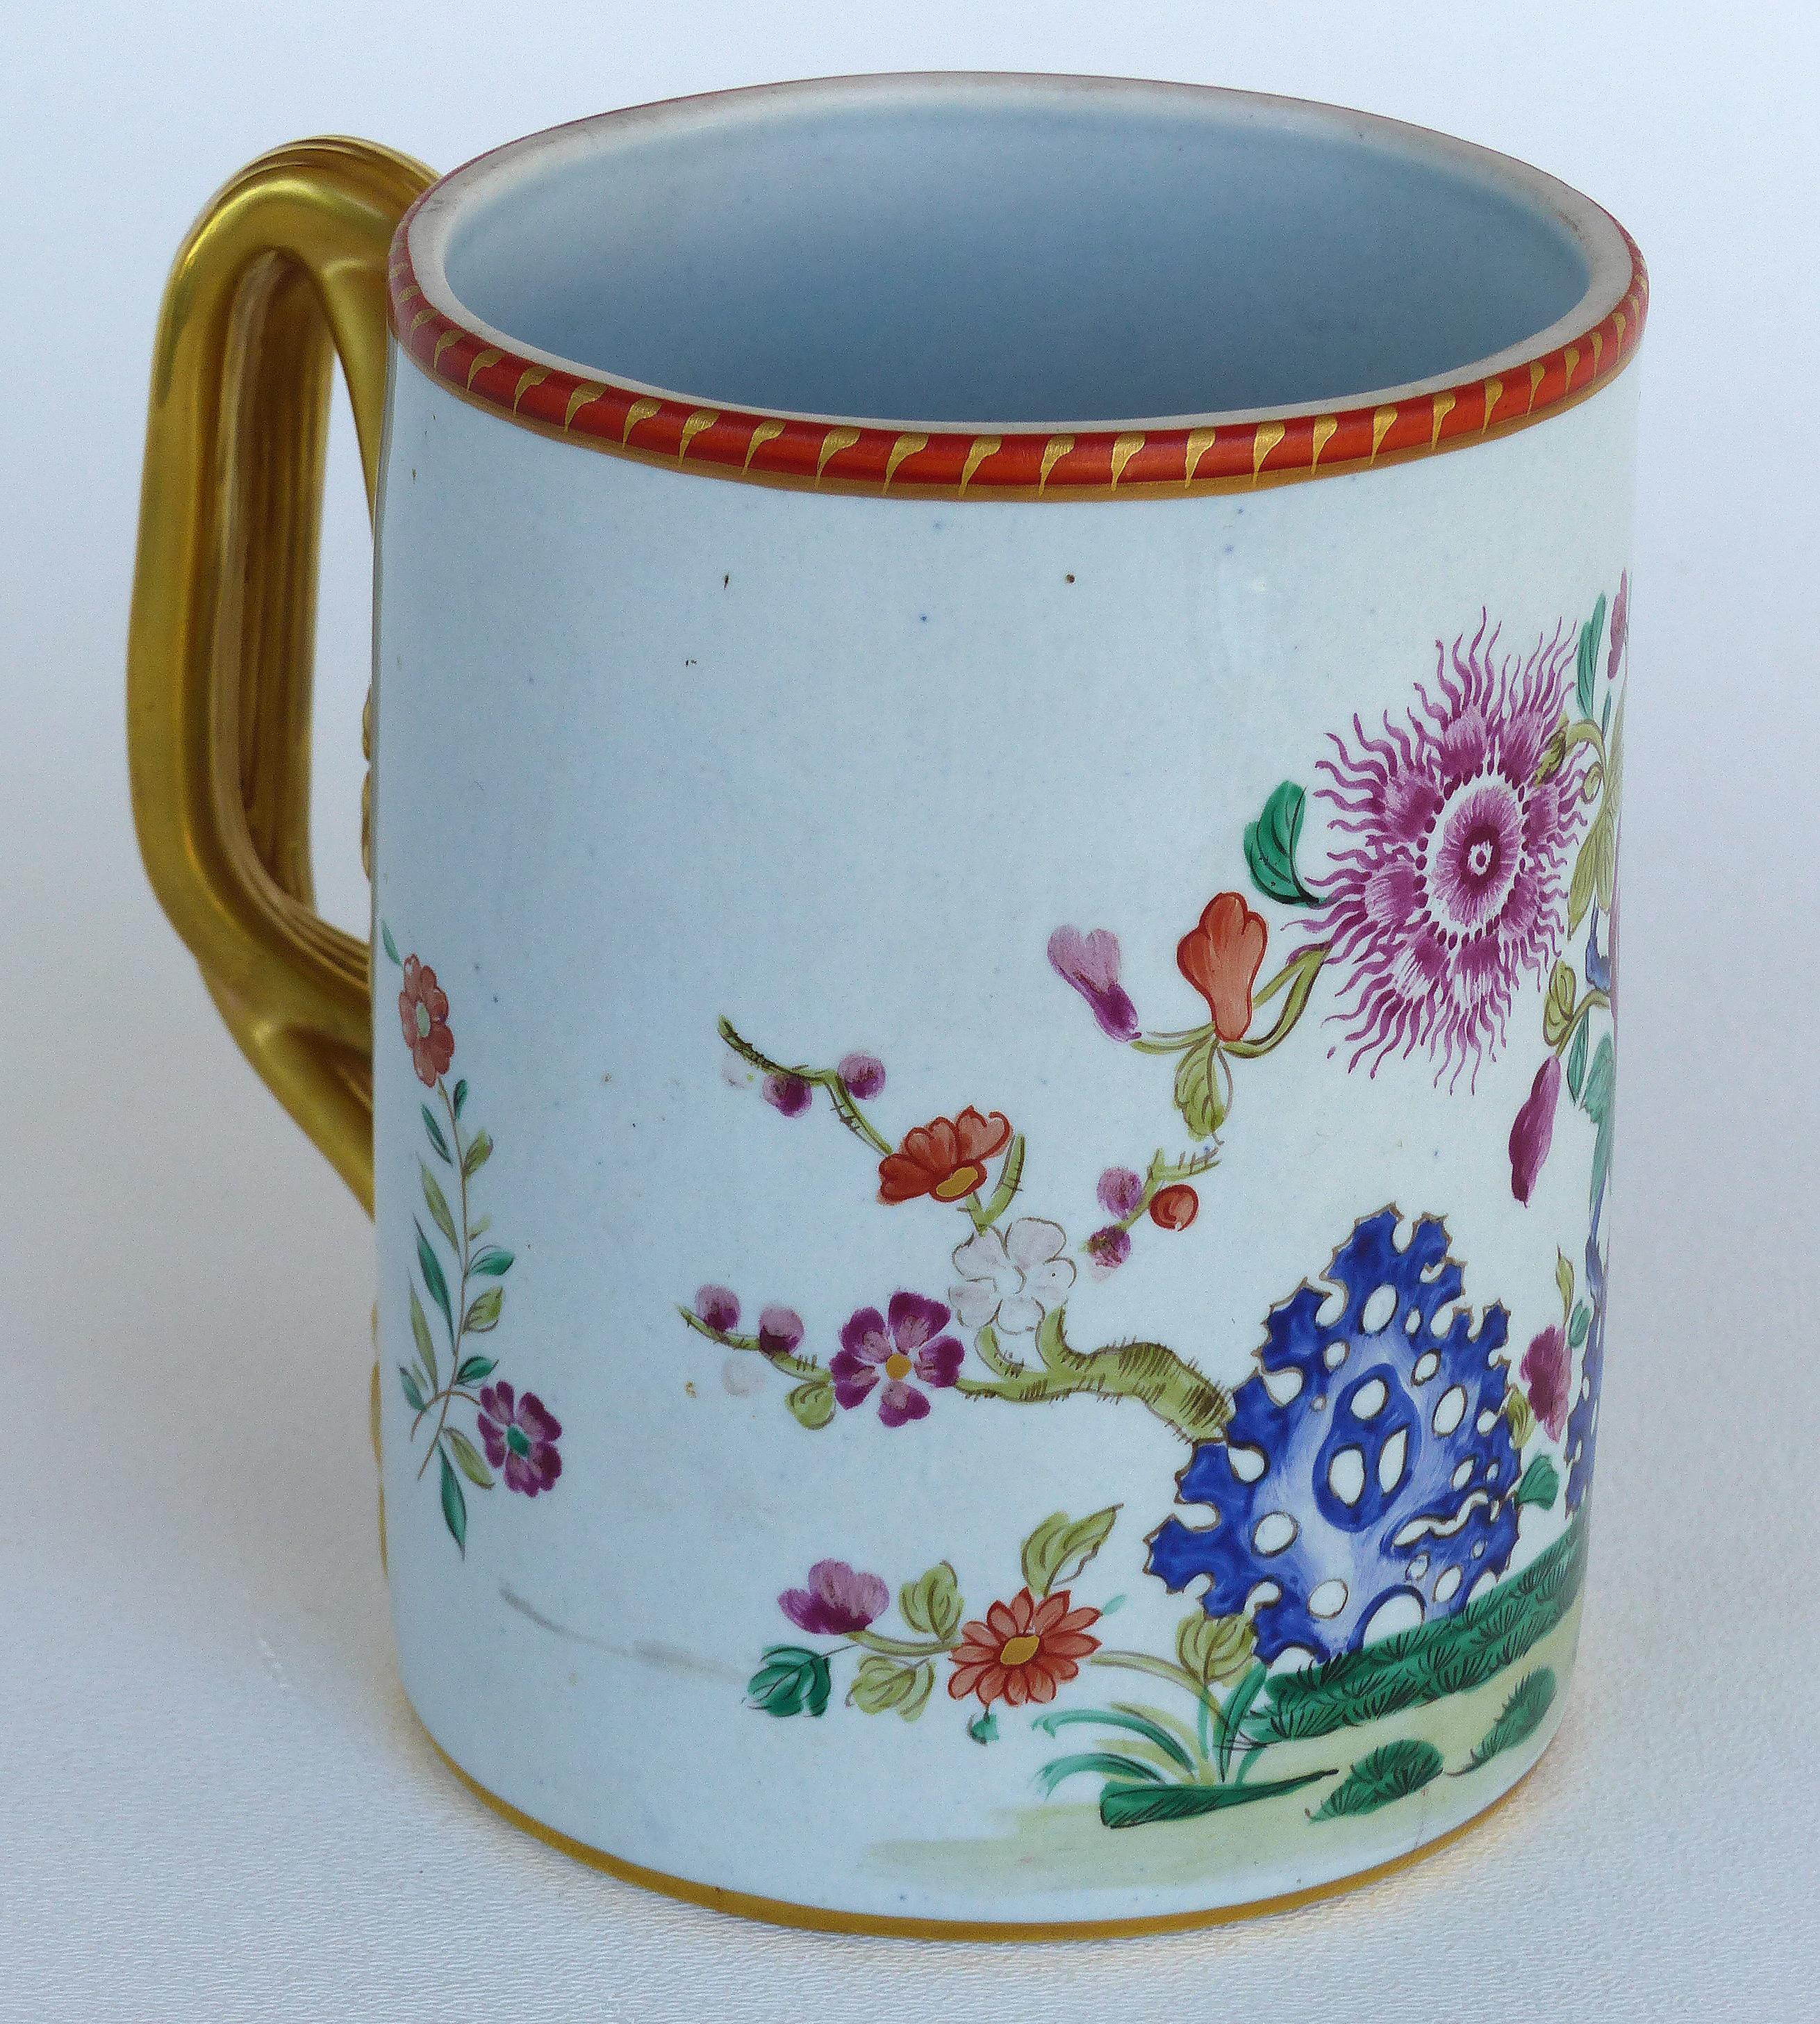 Offered for sale is an Italian Mottahedeh reproduction of an English Lowestoft fine 18th century Imperial mug with stylized gilded handle and floral decoration. Stamped on the underside.